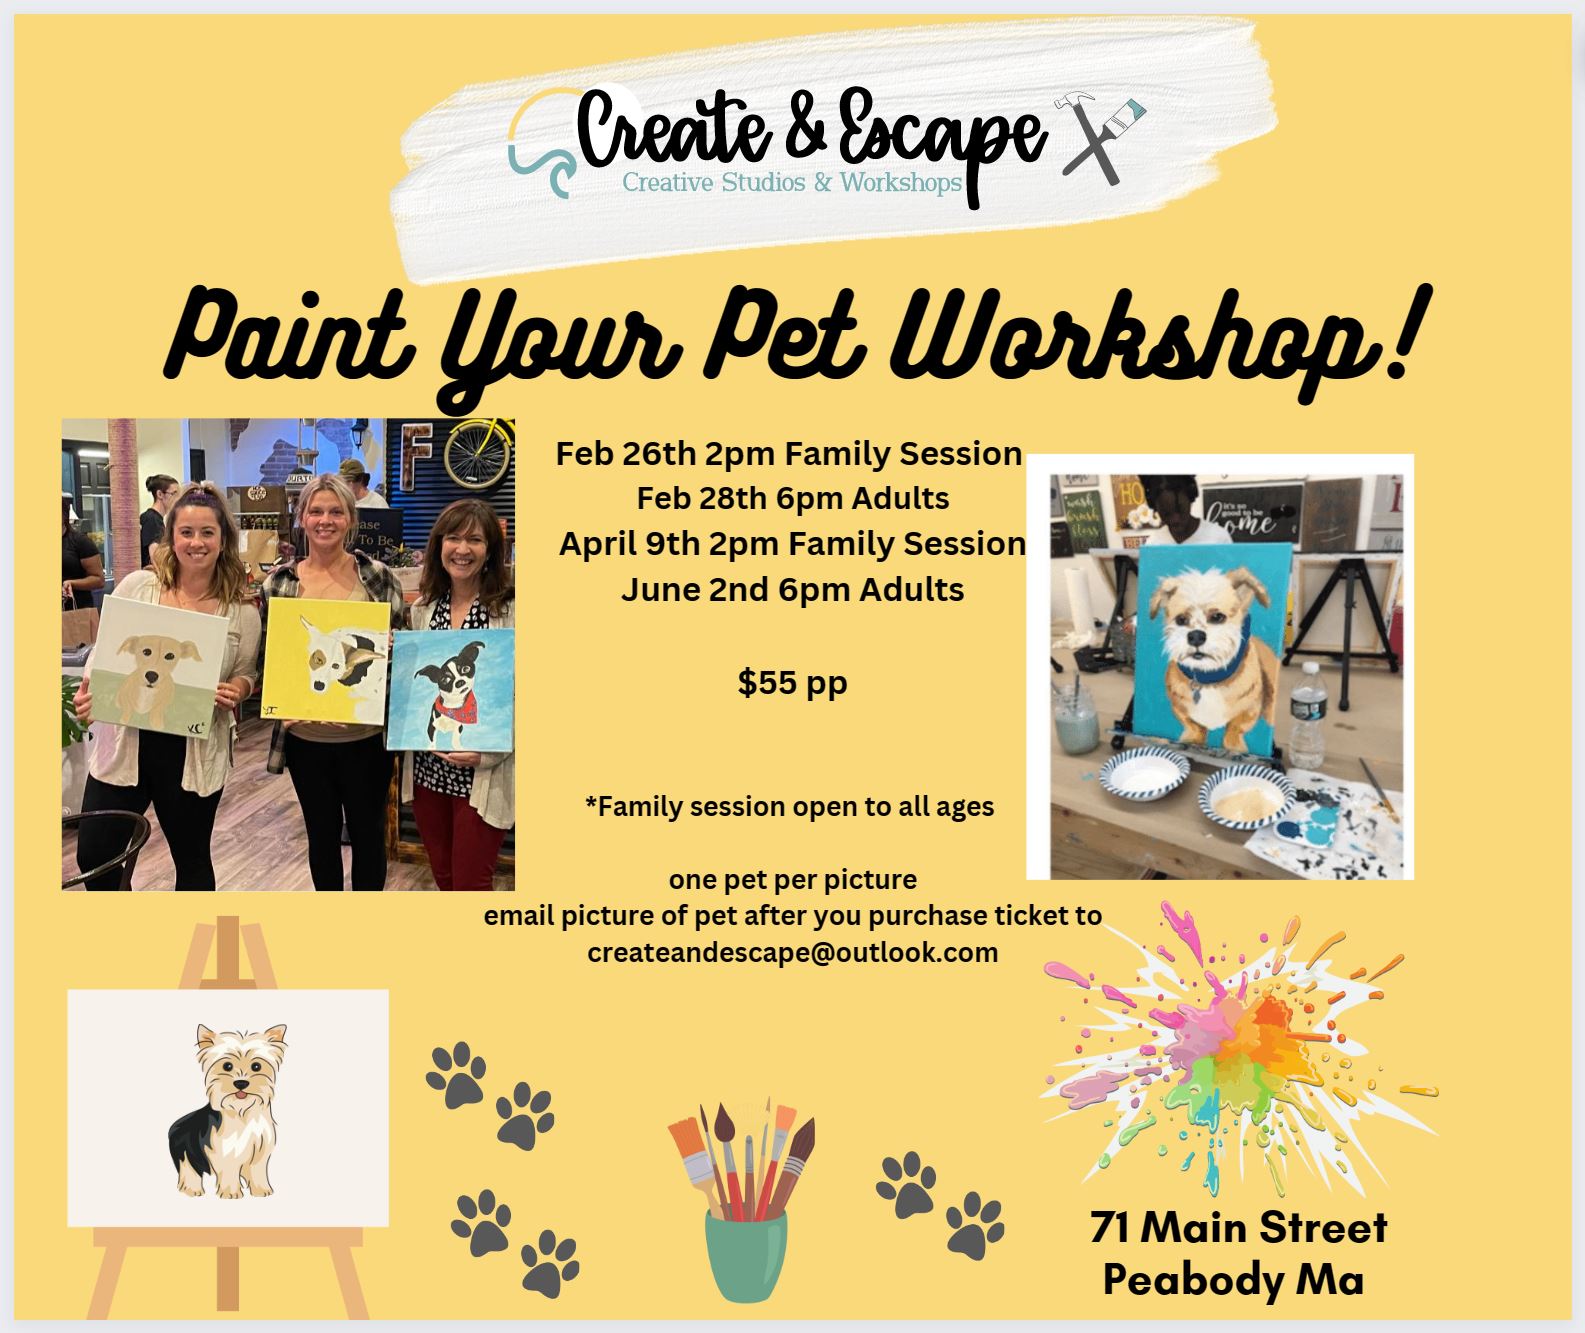 a flyer for a pet workshop with photos of dogs and their owners.